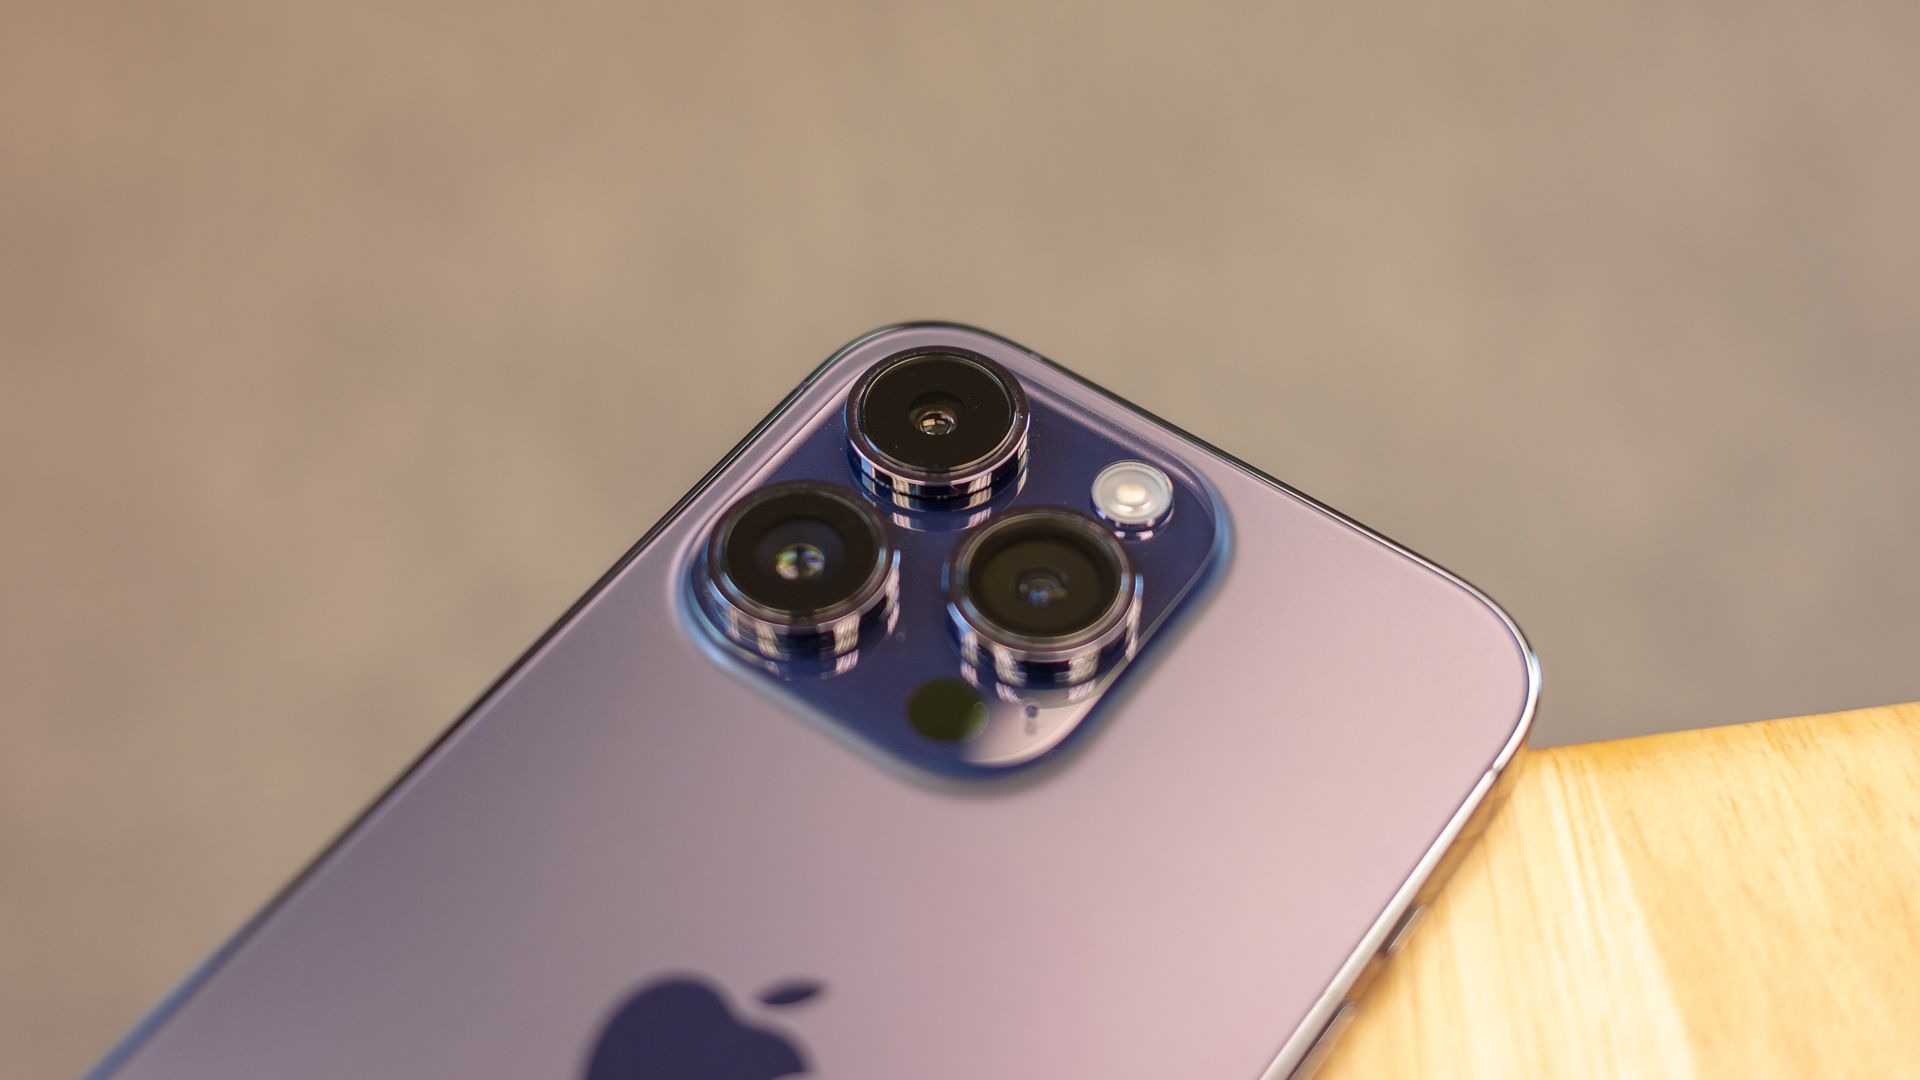 The camera array on an iPhone